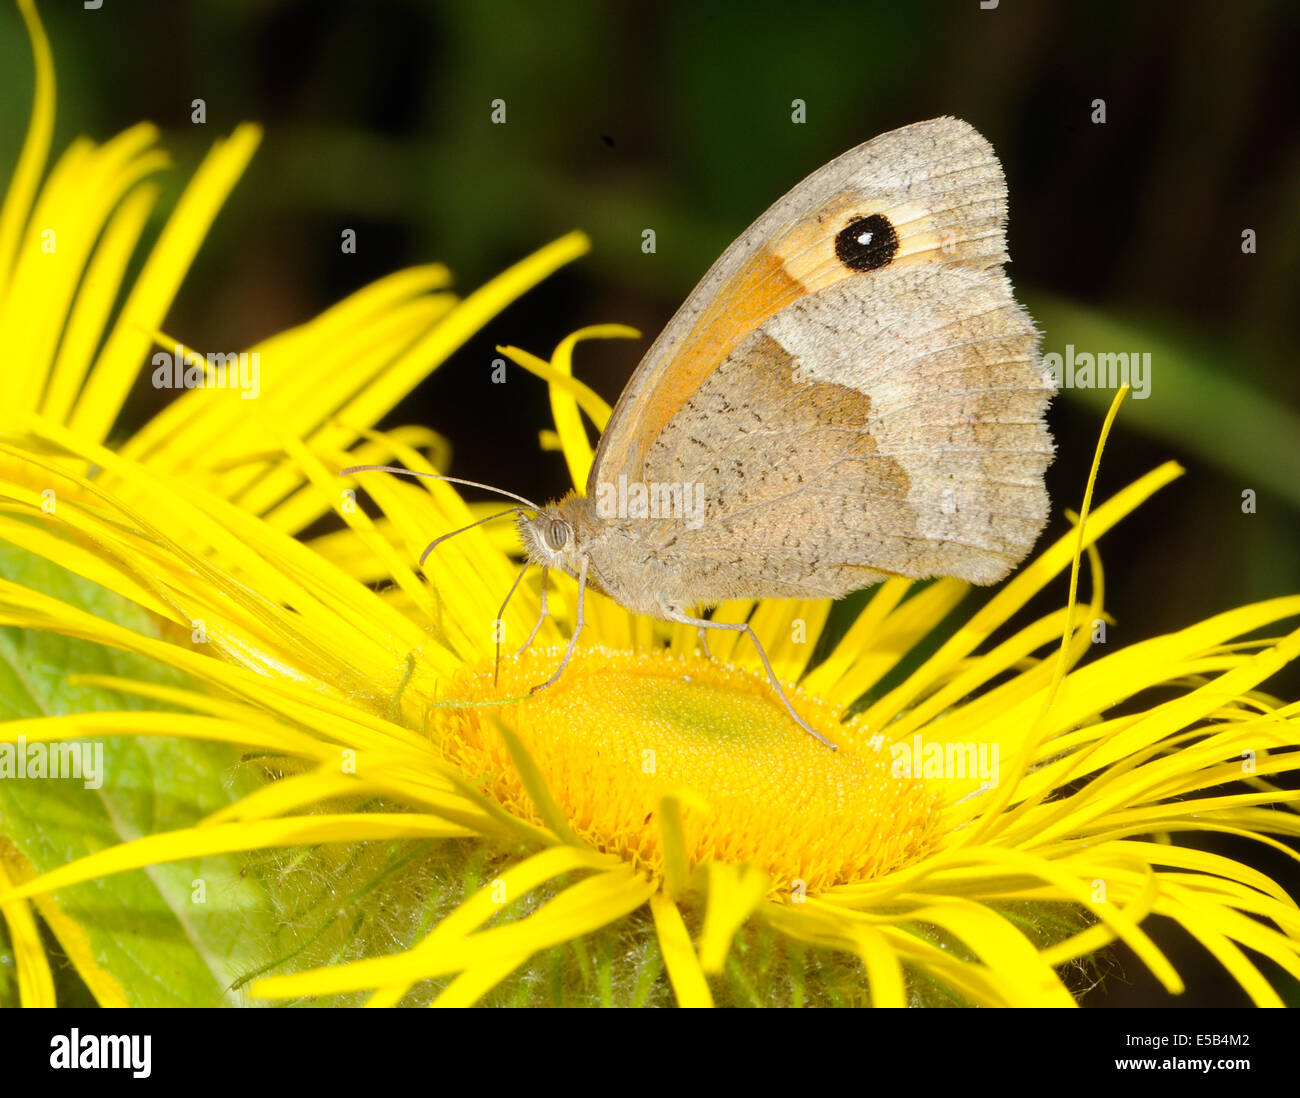 A Meadow Brown butterfly (Maniola jurtina) with closed wings showing the brown underside feeds on a yellow Inula hookeri flower. Bedgebury Forest, Ken Stock Photo